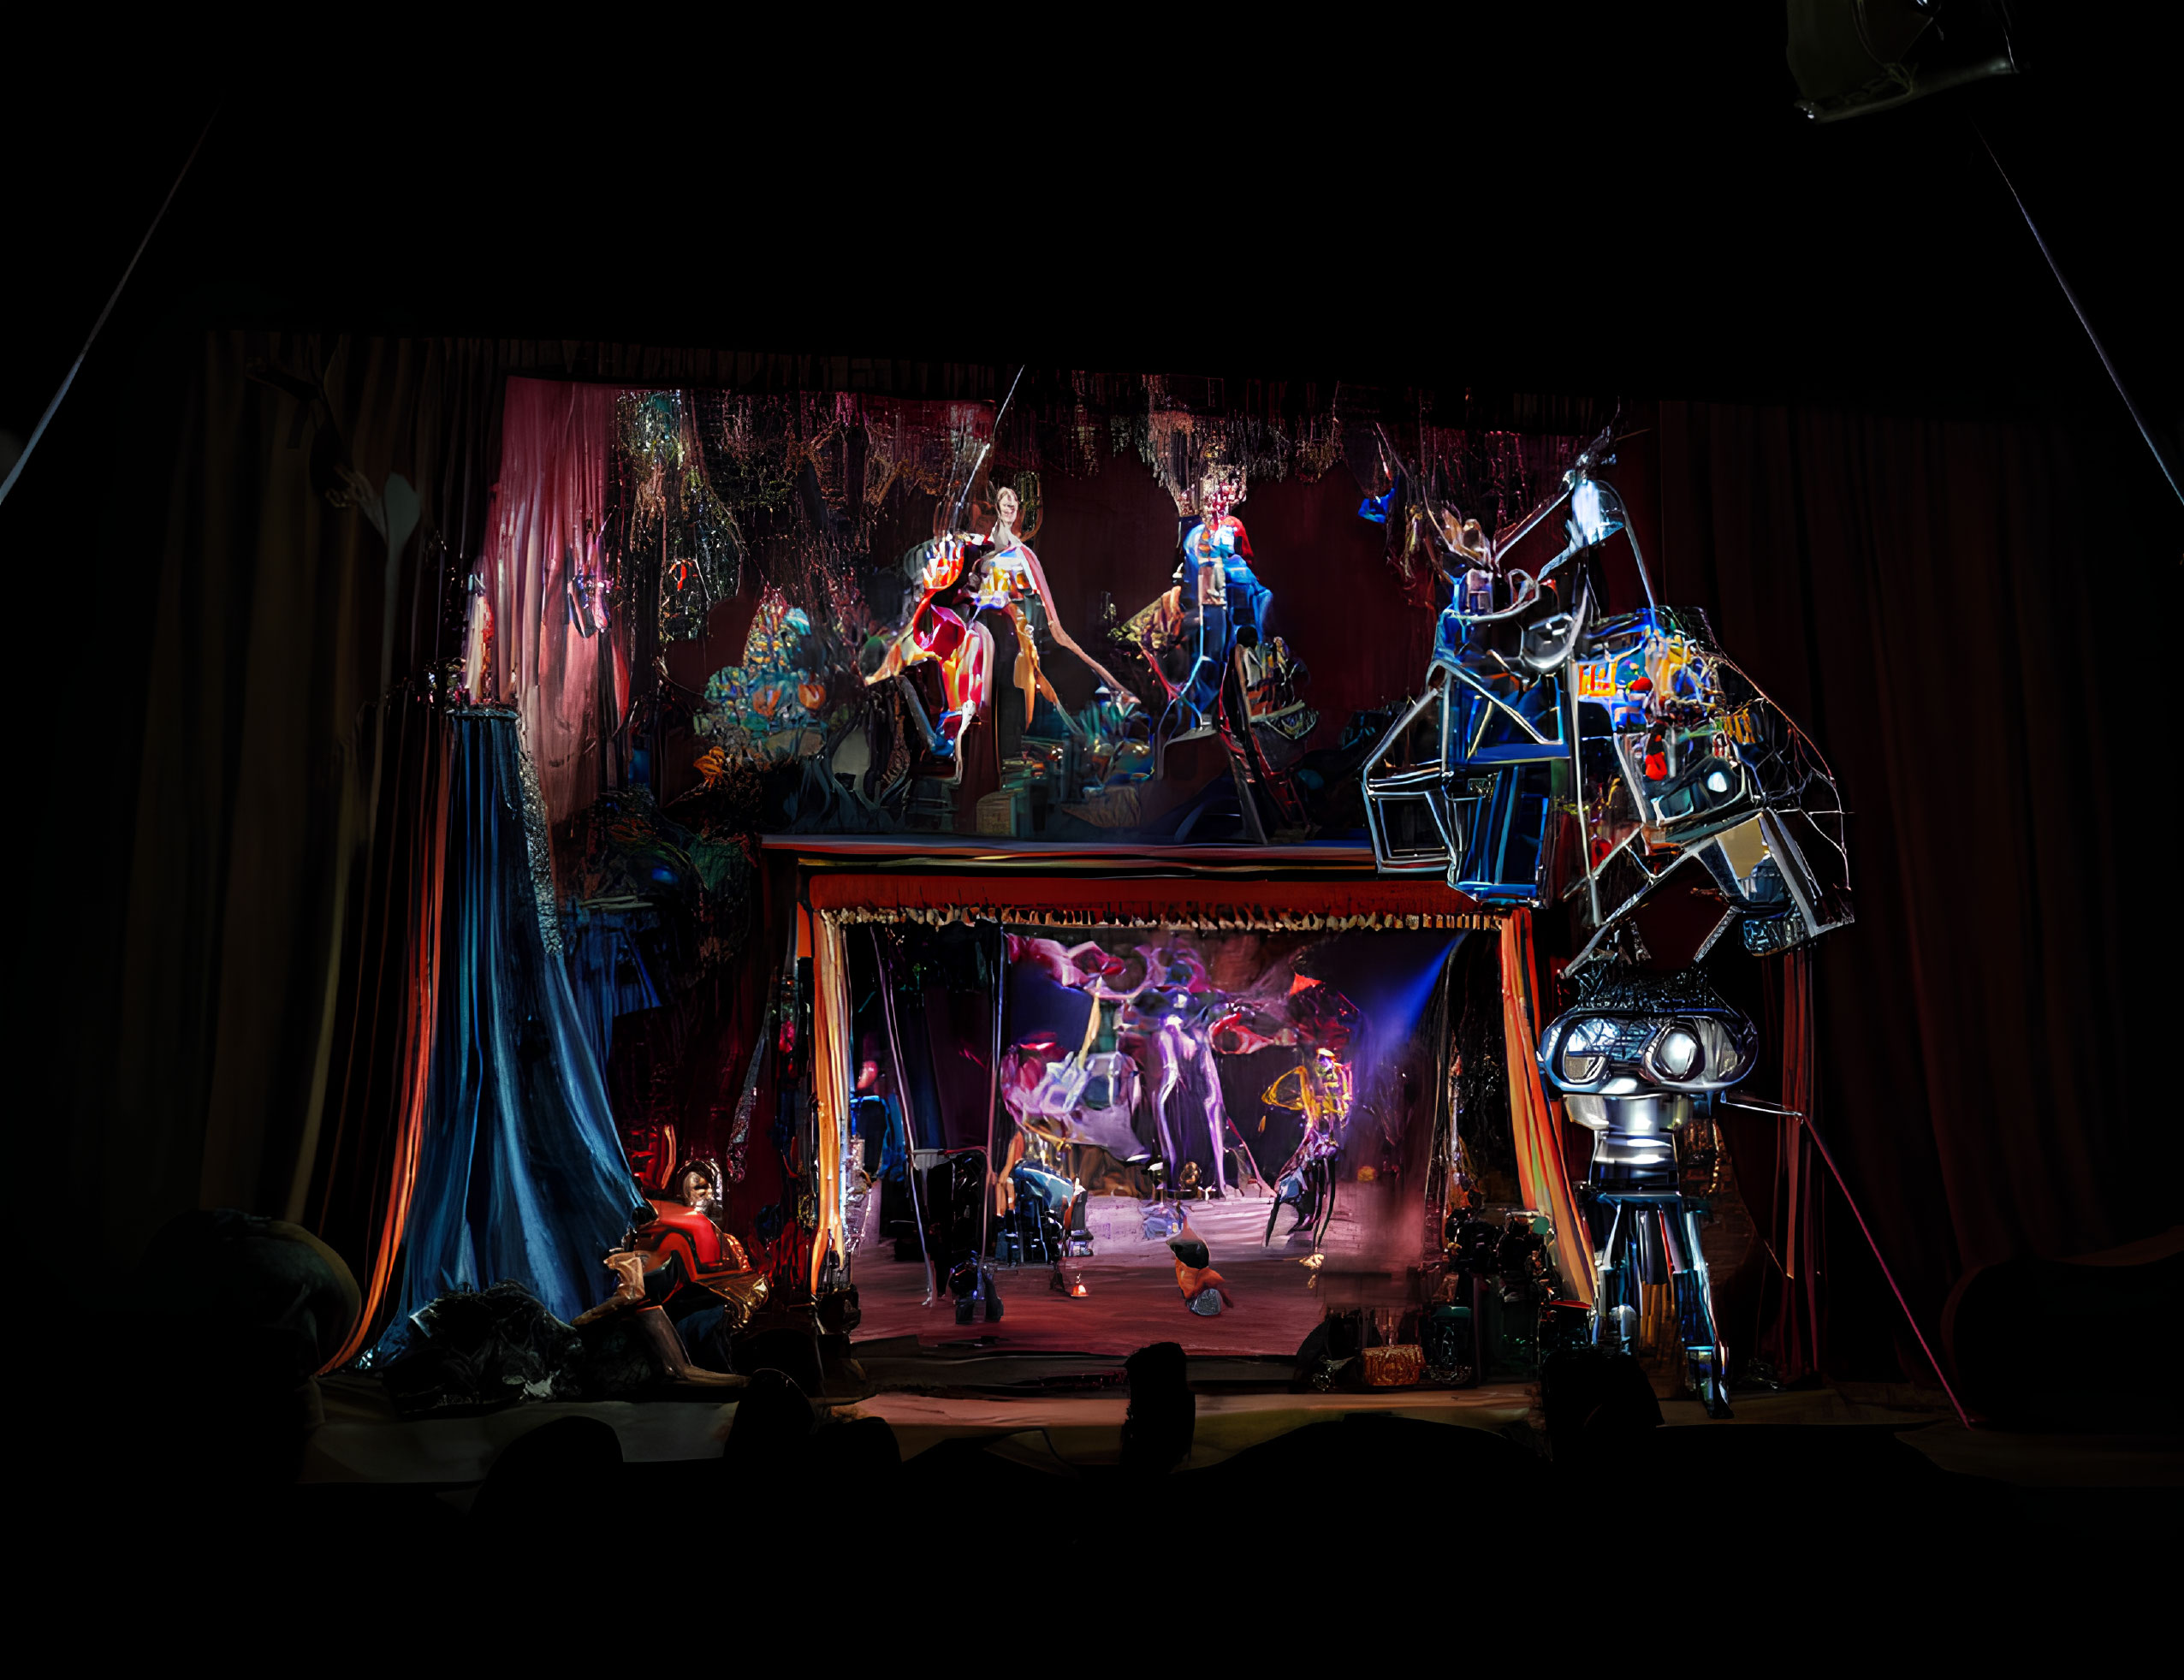 Theatrical stage with dramatic lighting and performers in elaborate costumes